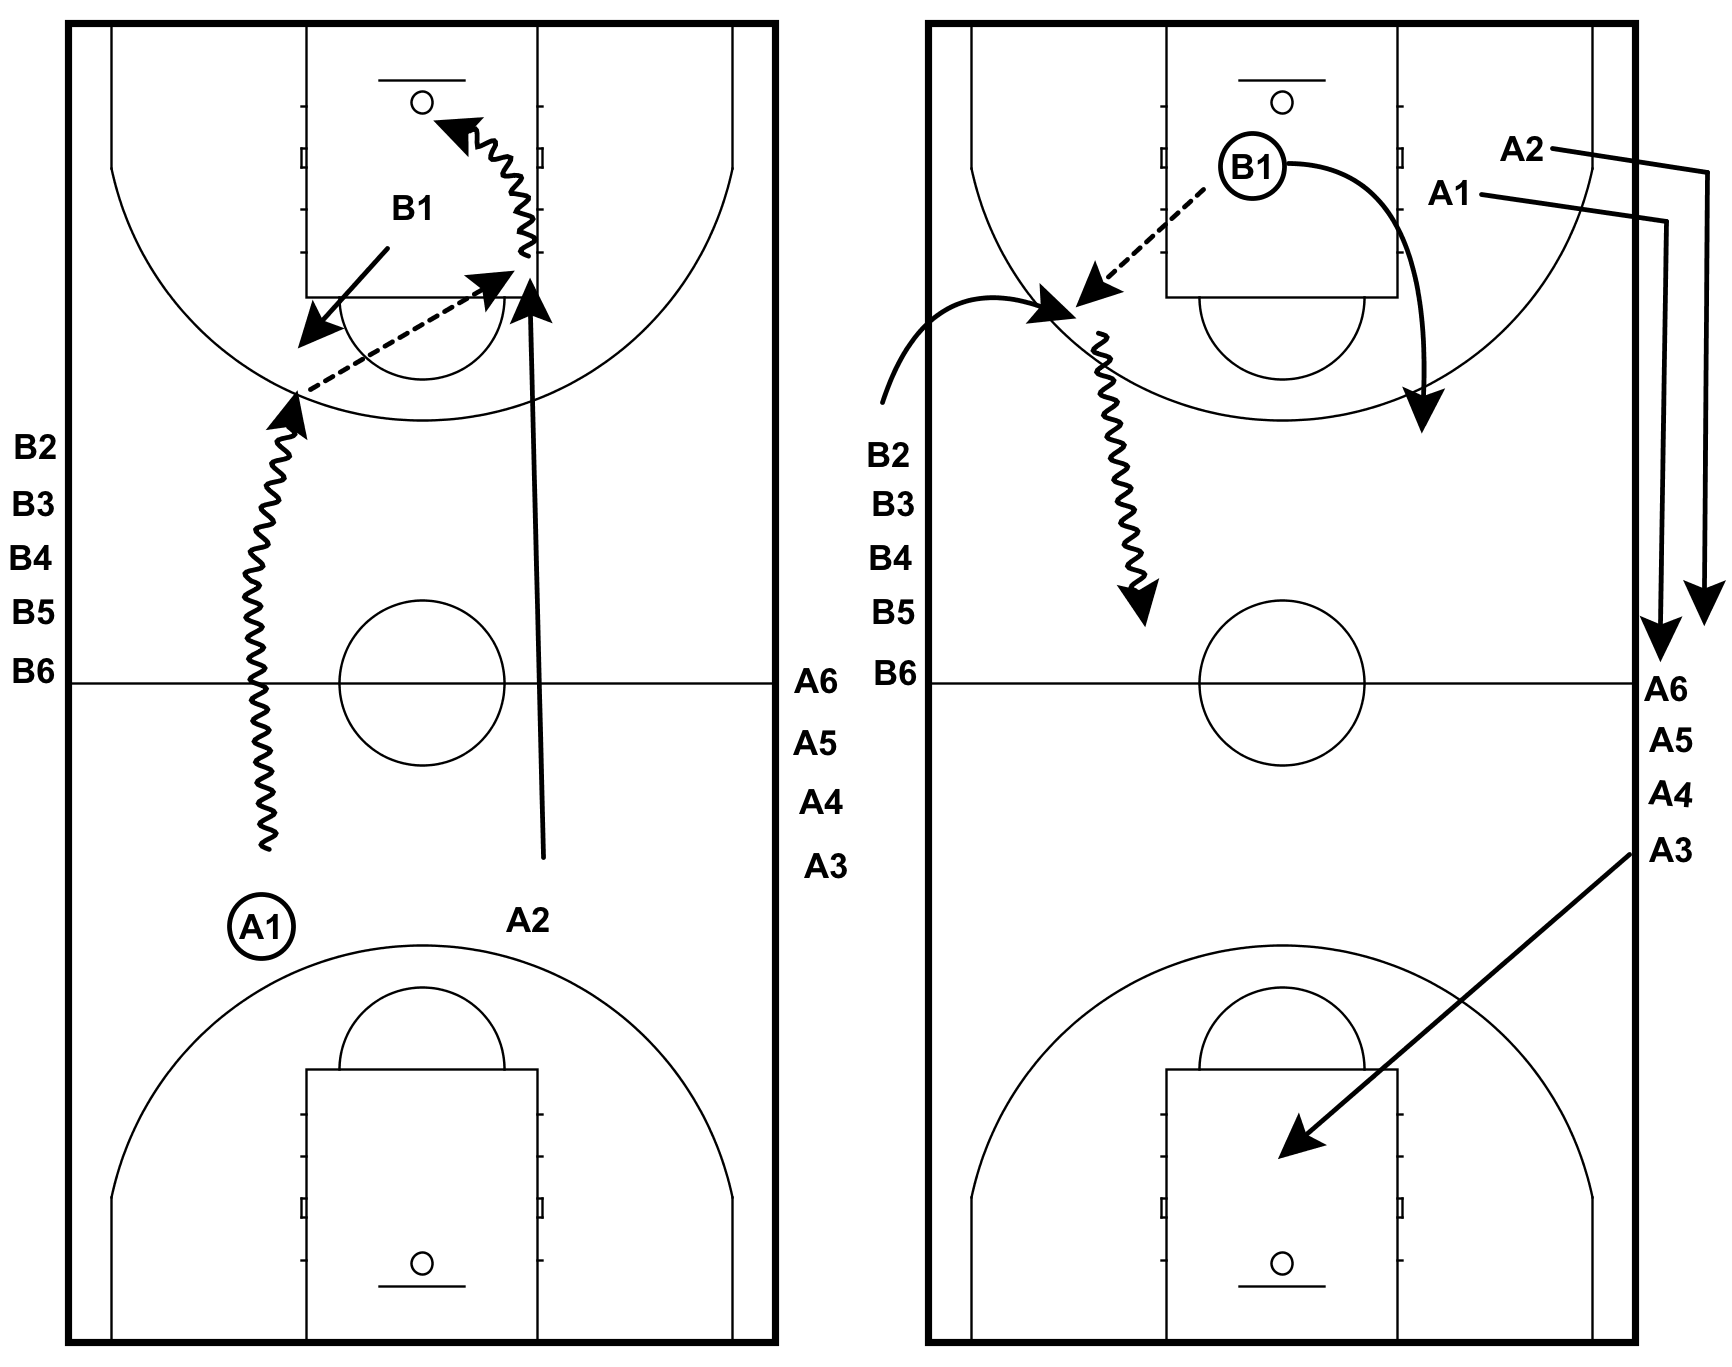 drills-finishing-at-the-rim-2-on-1-continuous